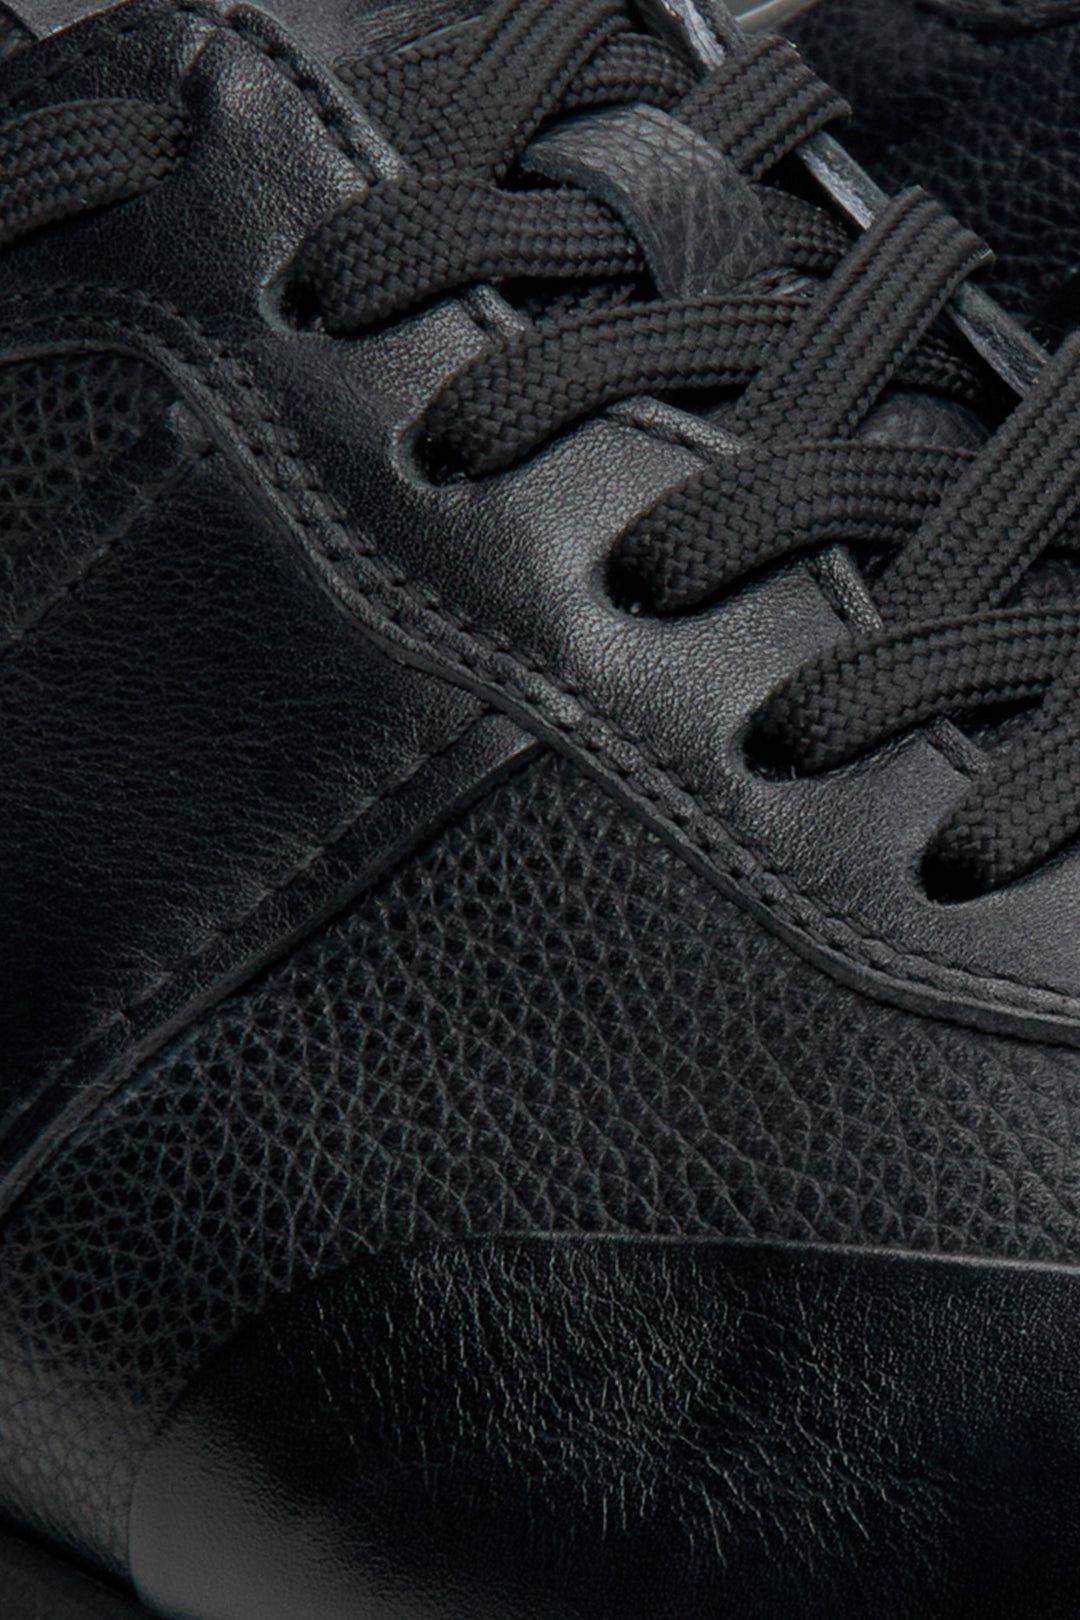 Men's black leather sneakers by Estro - close-up on details.